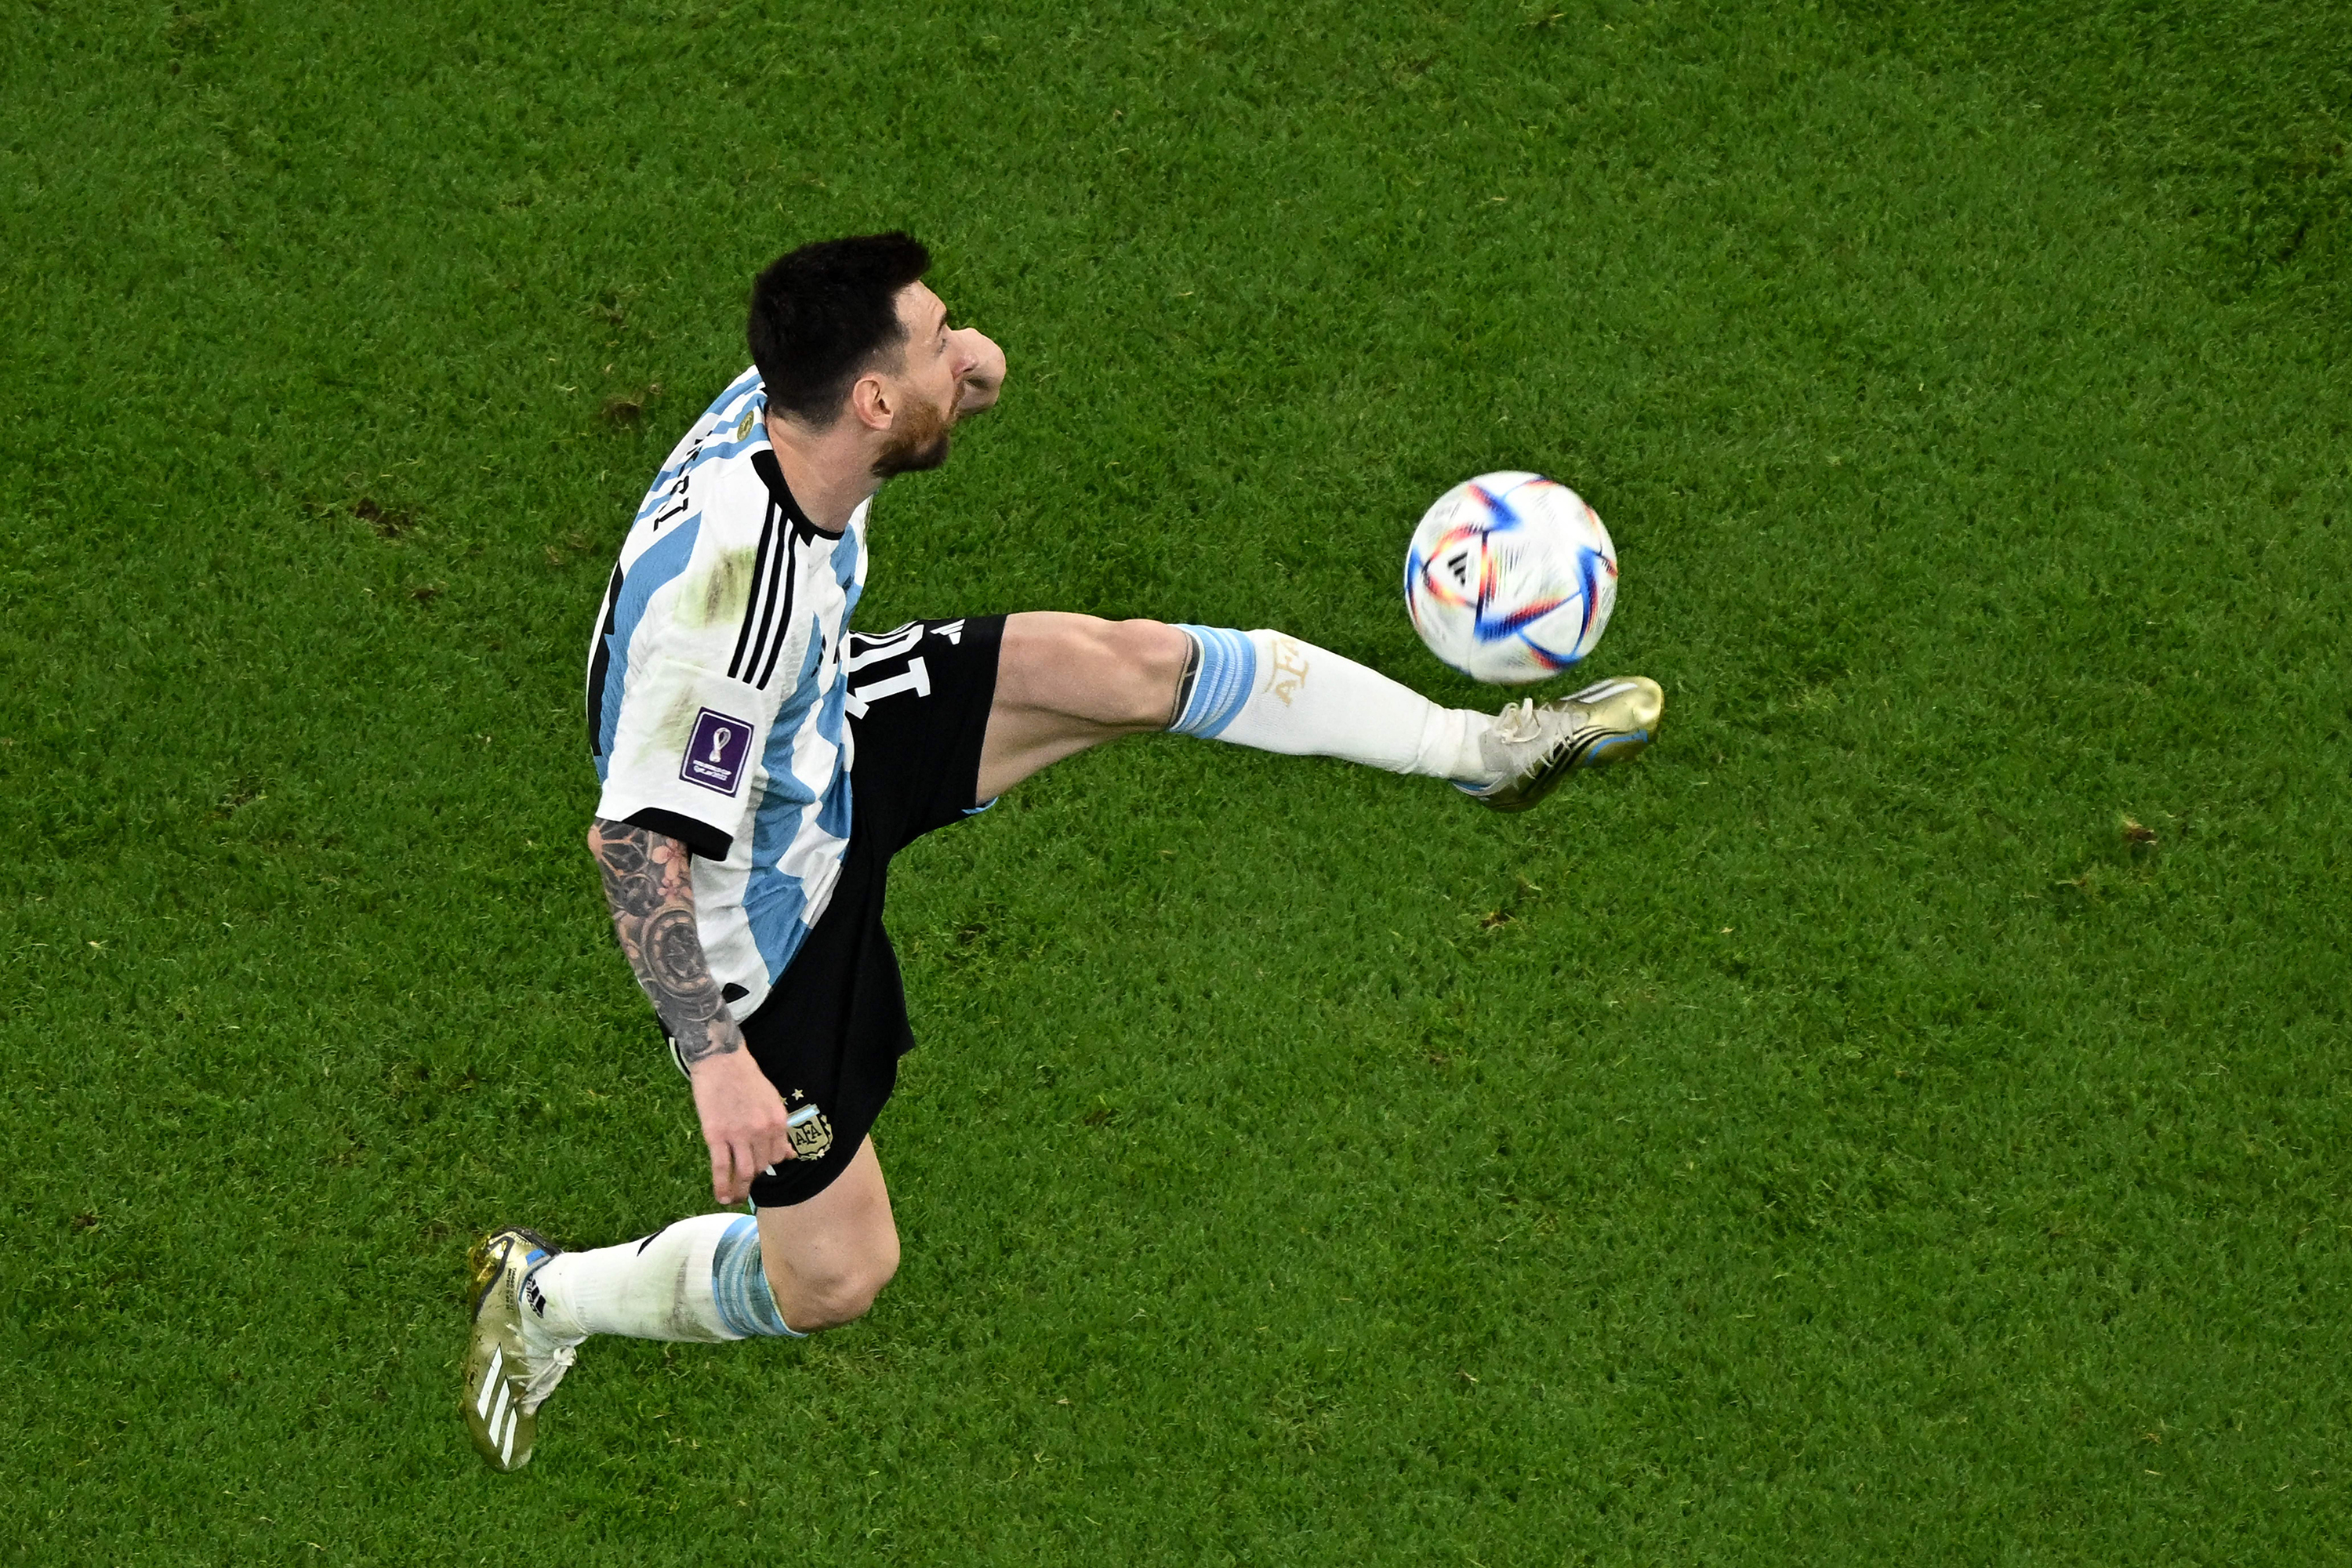 Argentina's #10 Lionel Messi kicks the ball during the Qatar 2022 World Cup Group C football match between Argentina and Mexico on Saturday.